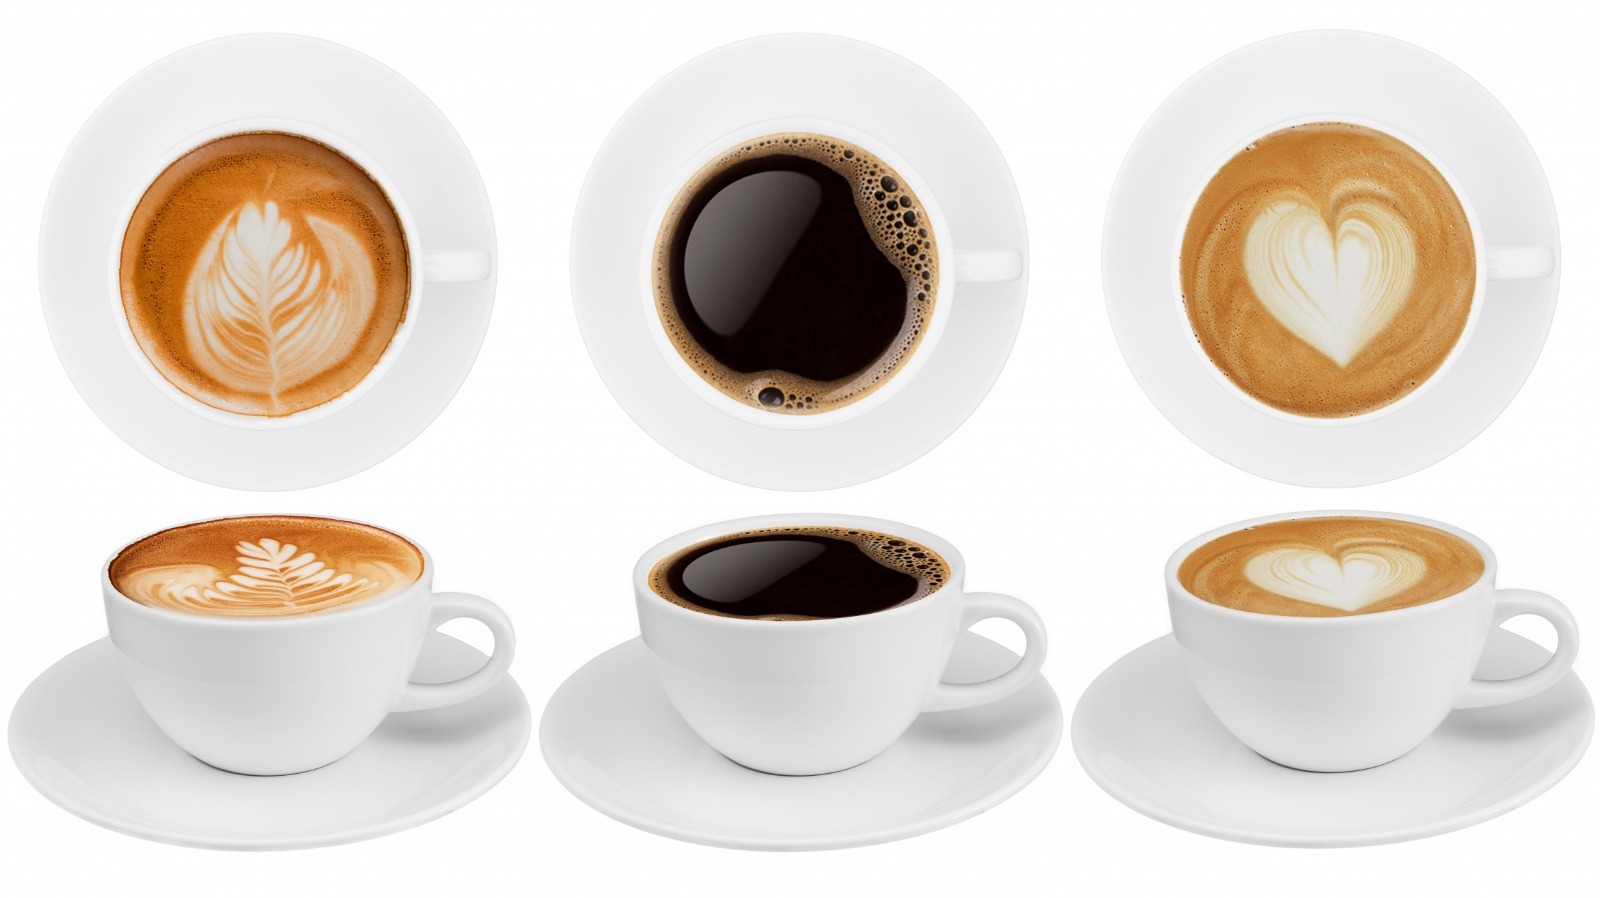 https://www.tastingtable.com/img/gallery/the-major-caffeine-difference-in-a-latte-vs-regular-coffee/l-intro-1681849000.jpg